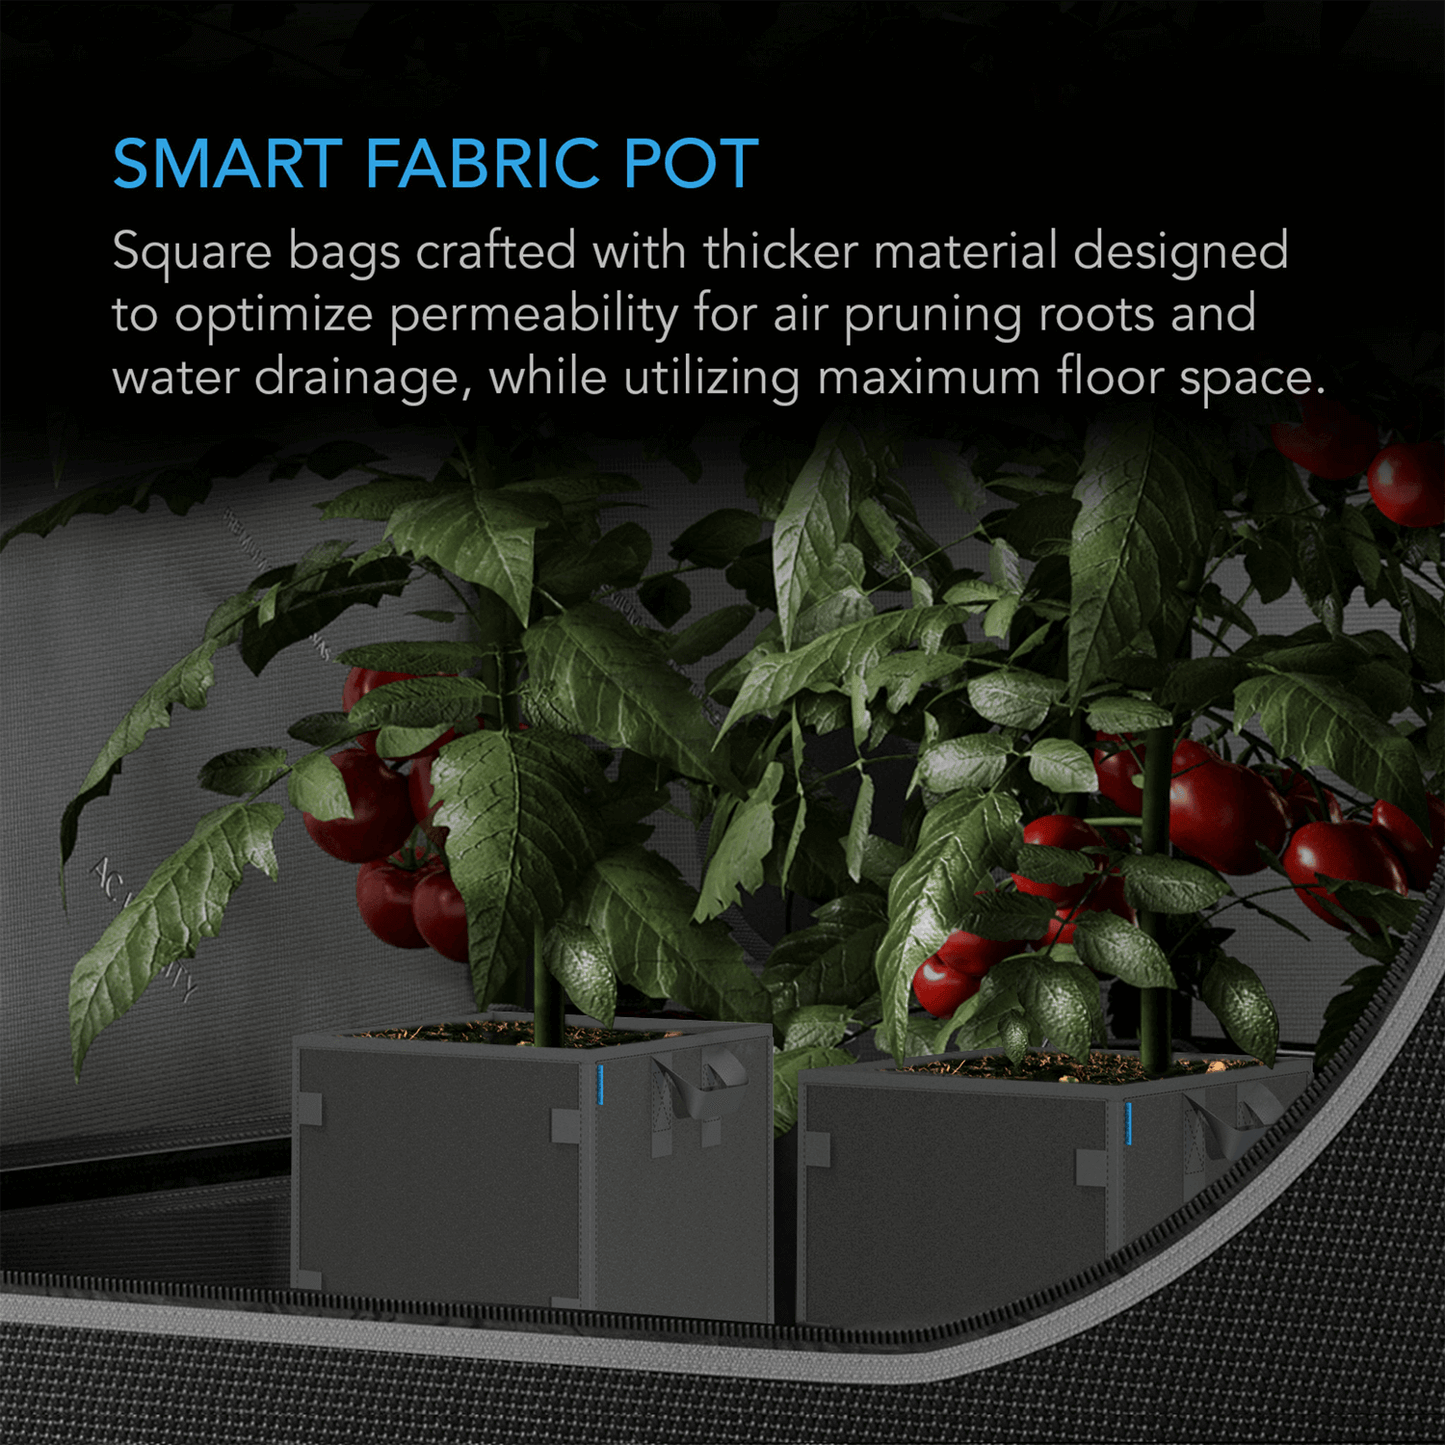 AC Infinity Heavy Duty Square Fabric Pots, 7 Gallon, 5-Pack | AC-SFP7 | Grow Tents Depot | Planting & Watering | 819137022645